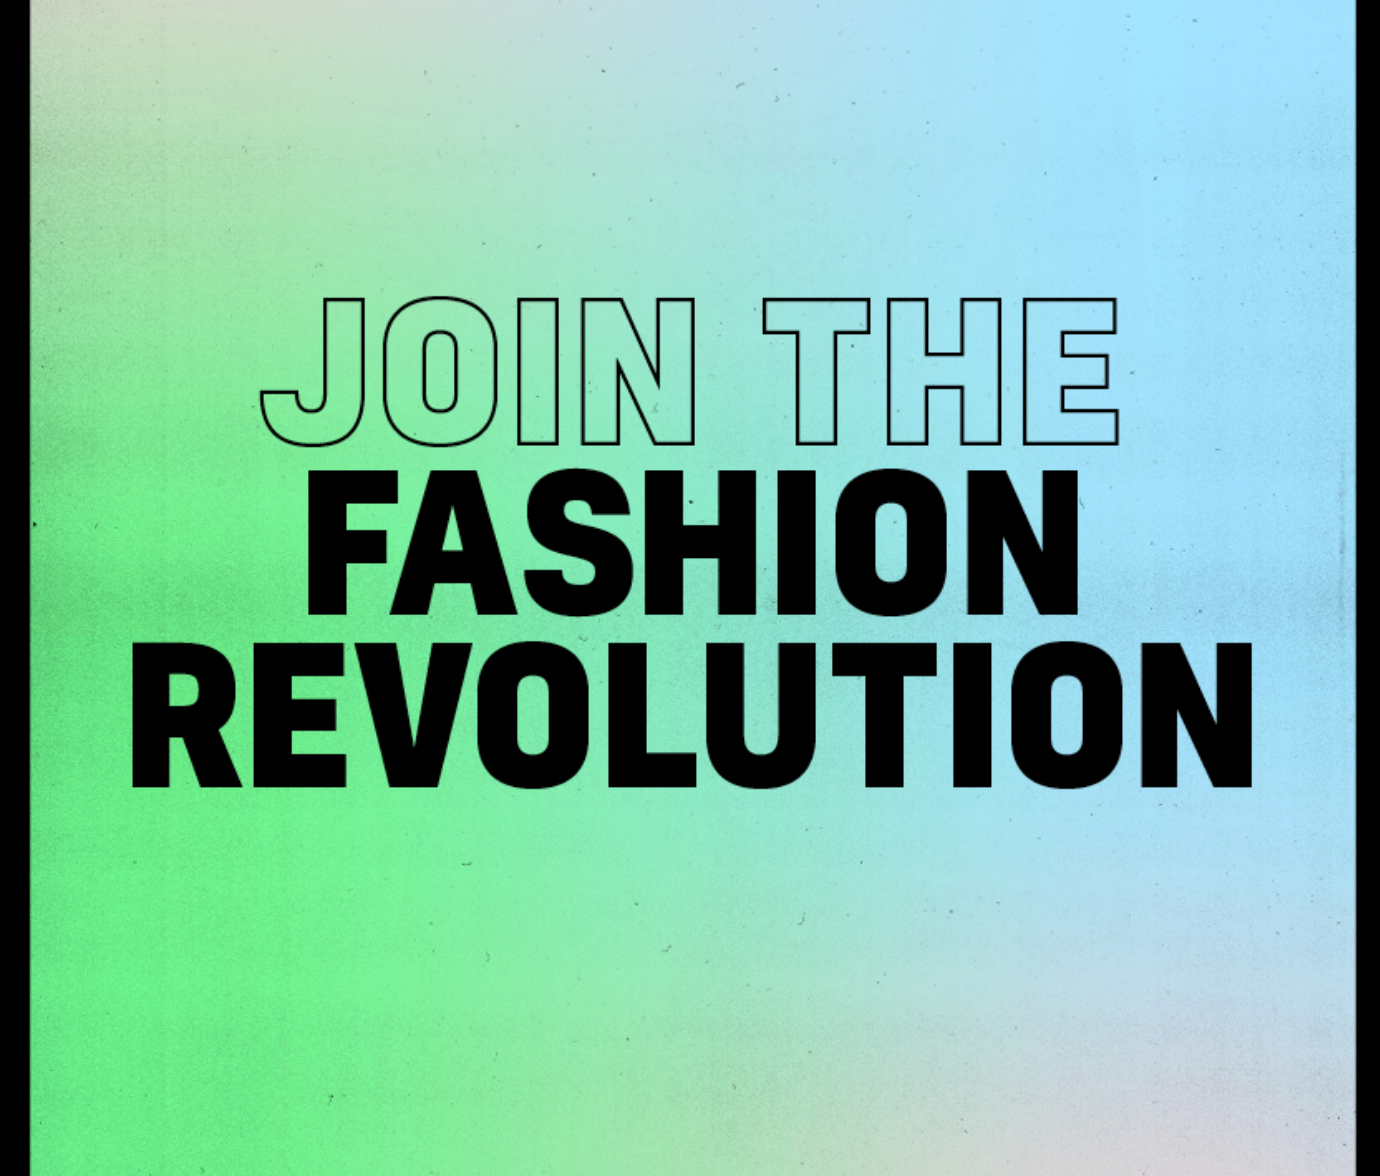 The best deals: Fashion Revolution meets Vintage., by Daria Andronescu